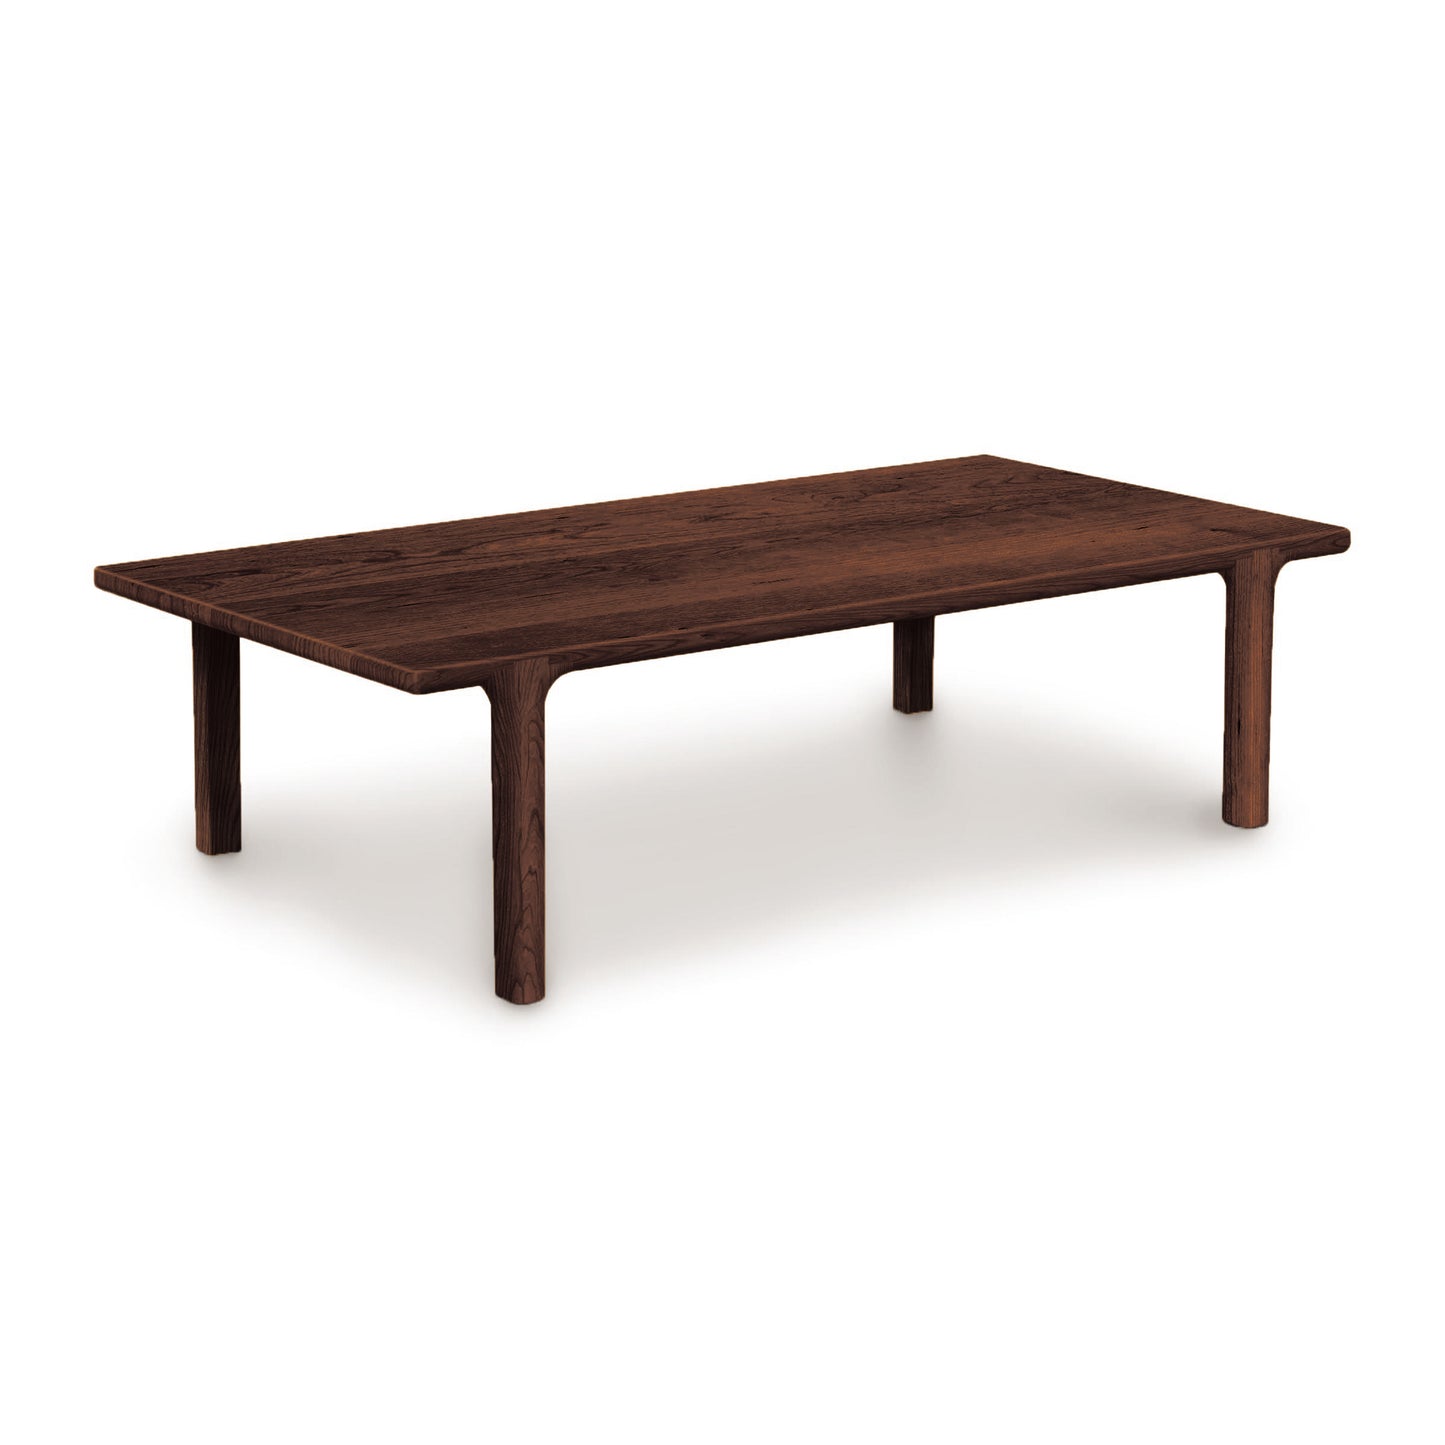 A contemporary design Copeland Furniture Sierra Rectangular Coffee Table, made from North American hardwood, isolated on a white background.